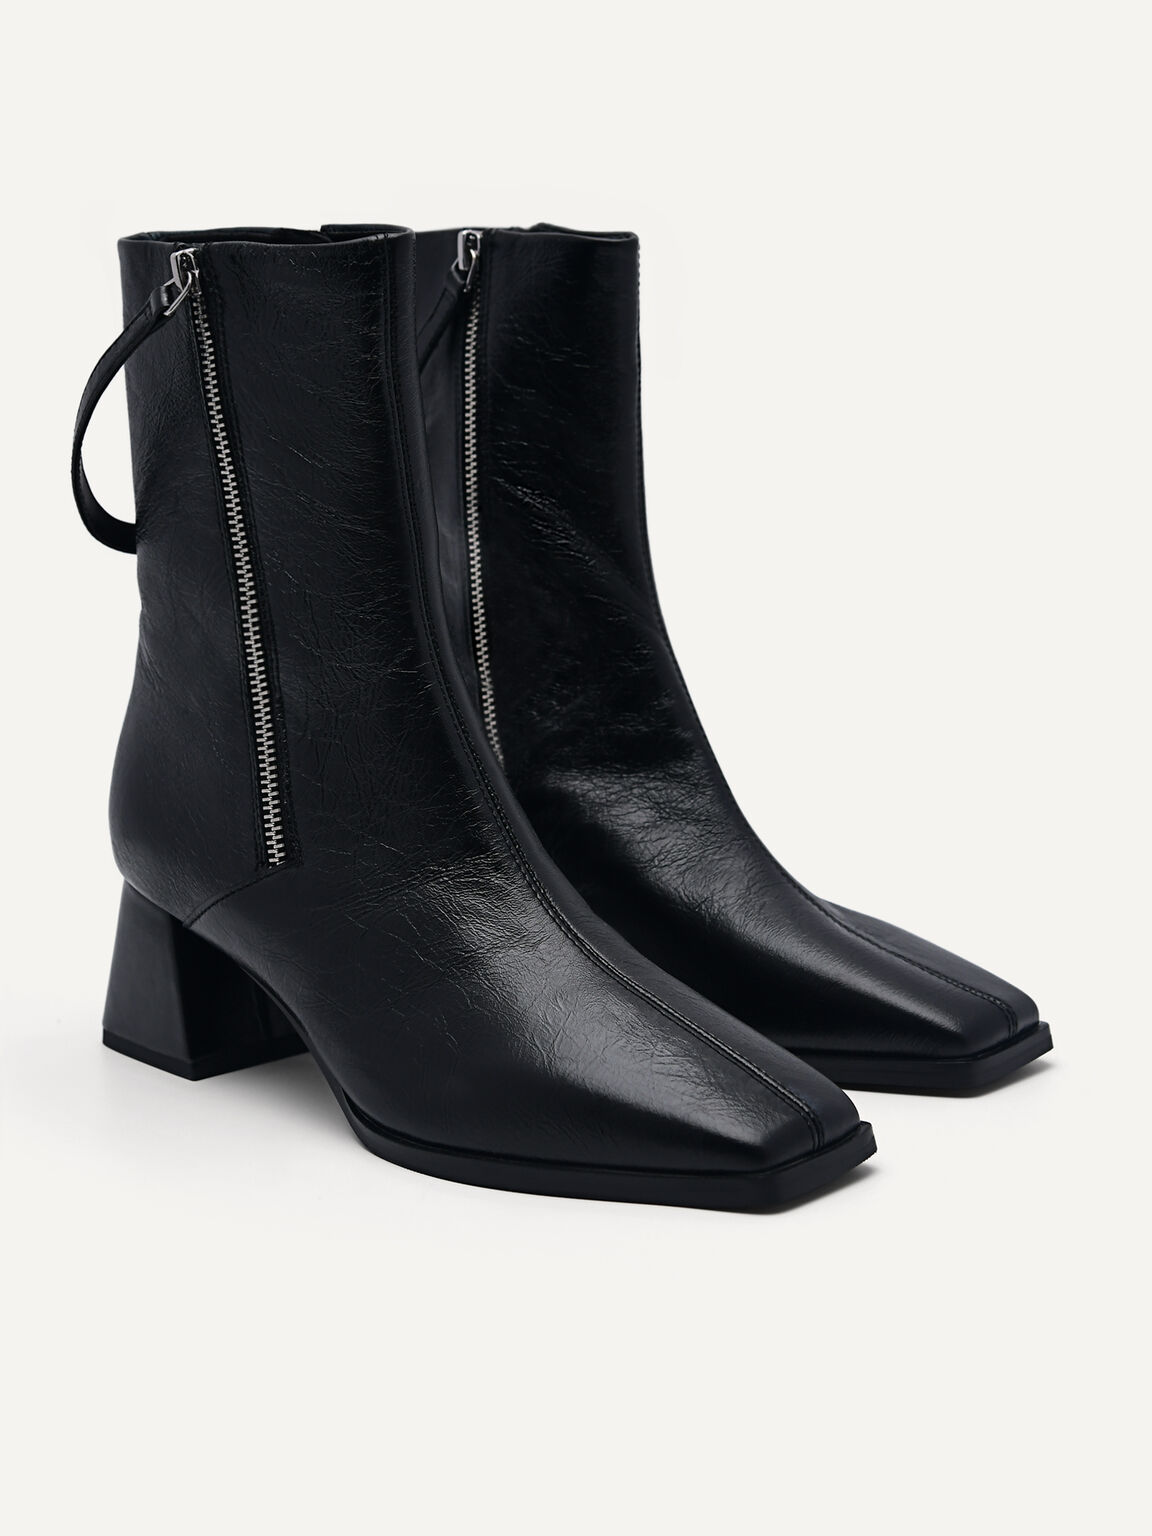 Leather Weimar Ankle Boots, Black